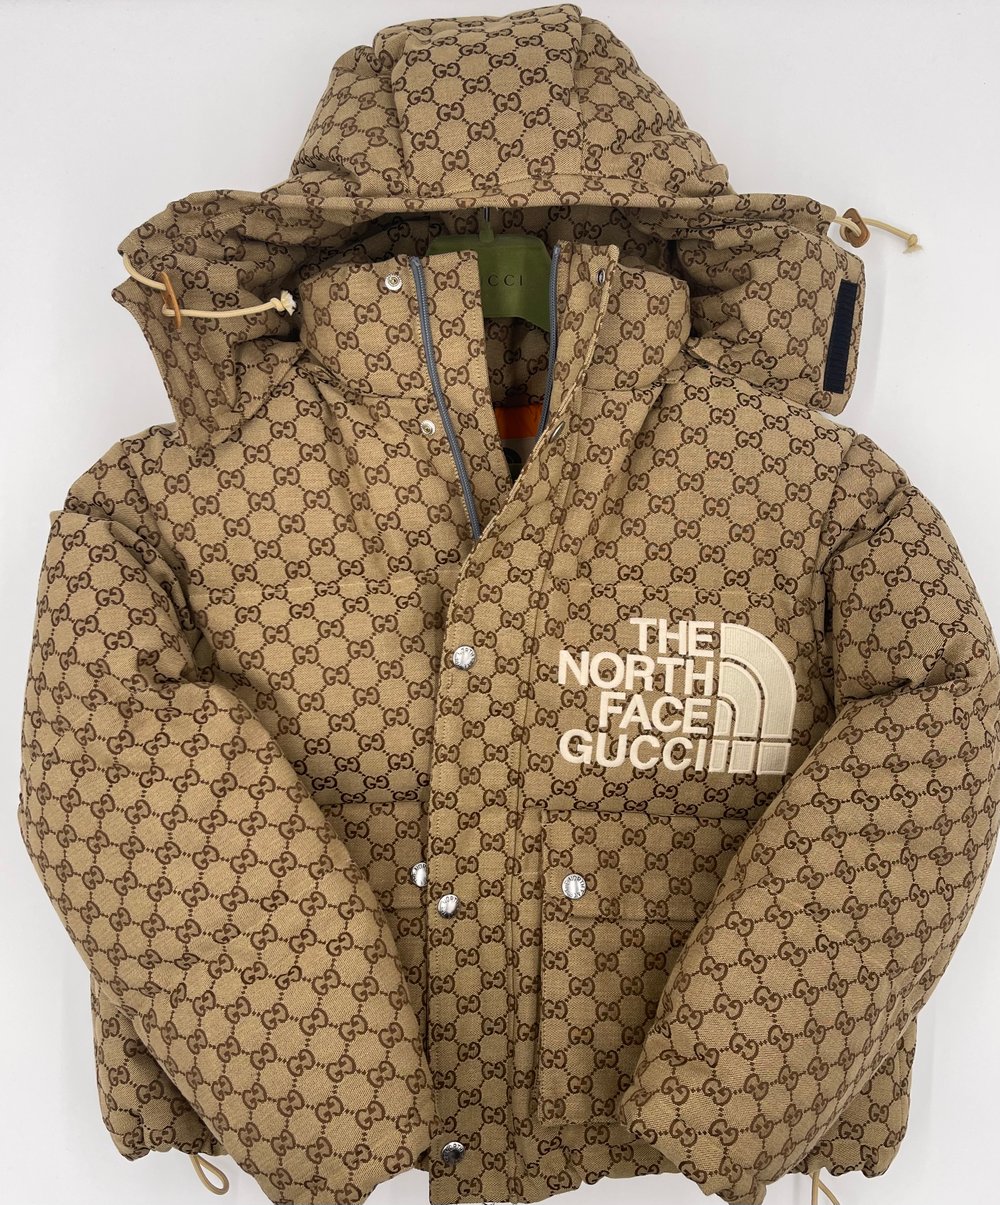 The North Face x Gucci Padded Jacket (XS) Brand New With Tags Available Now